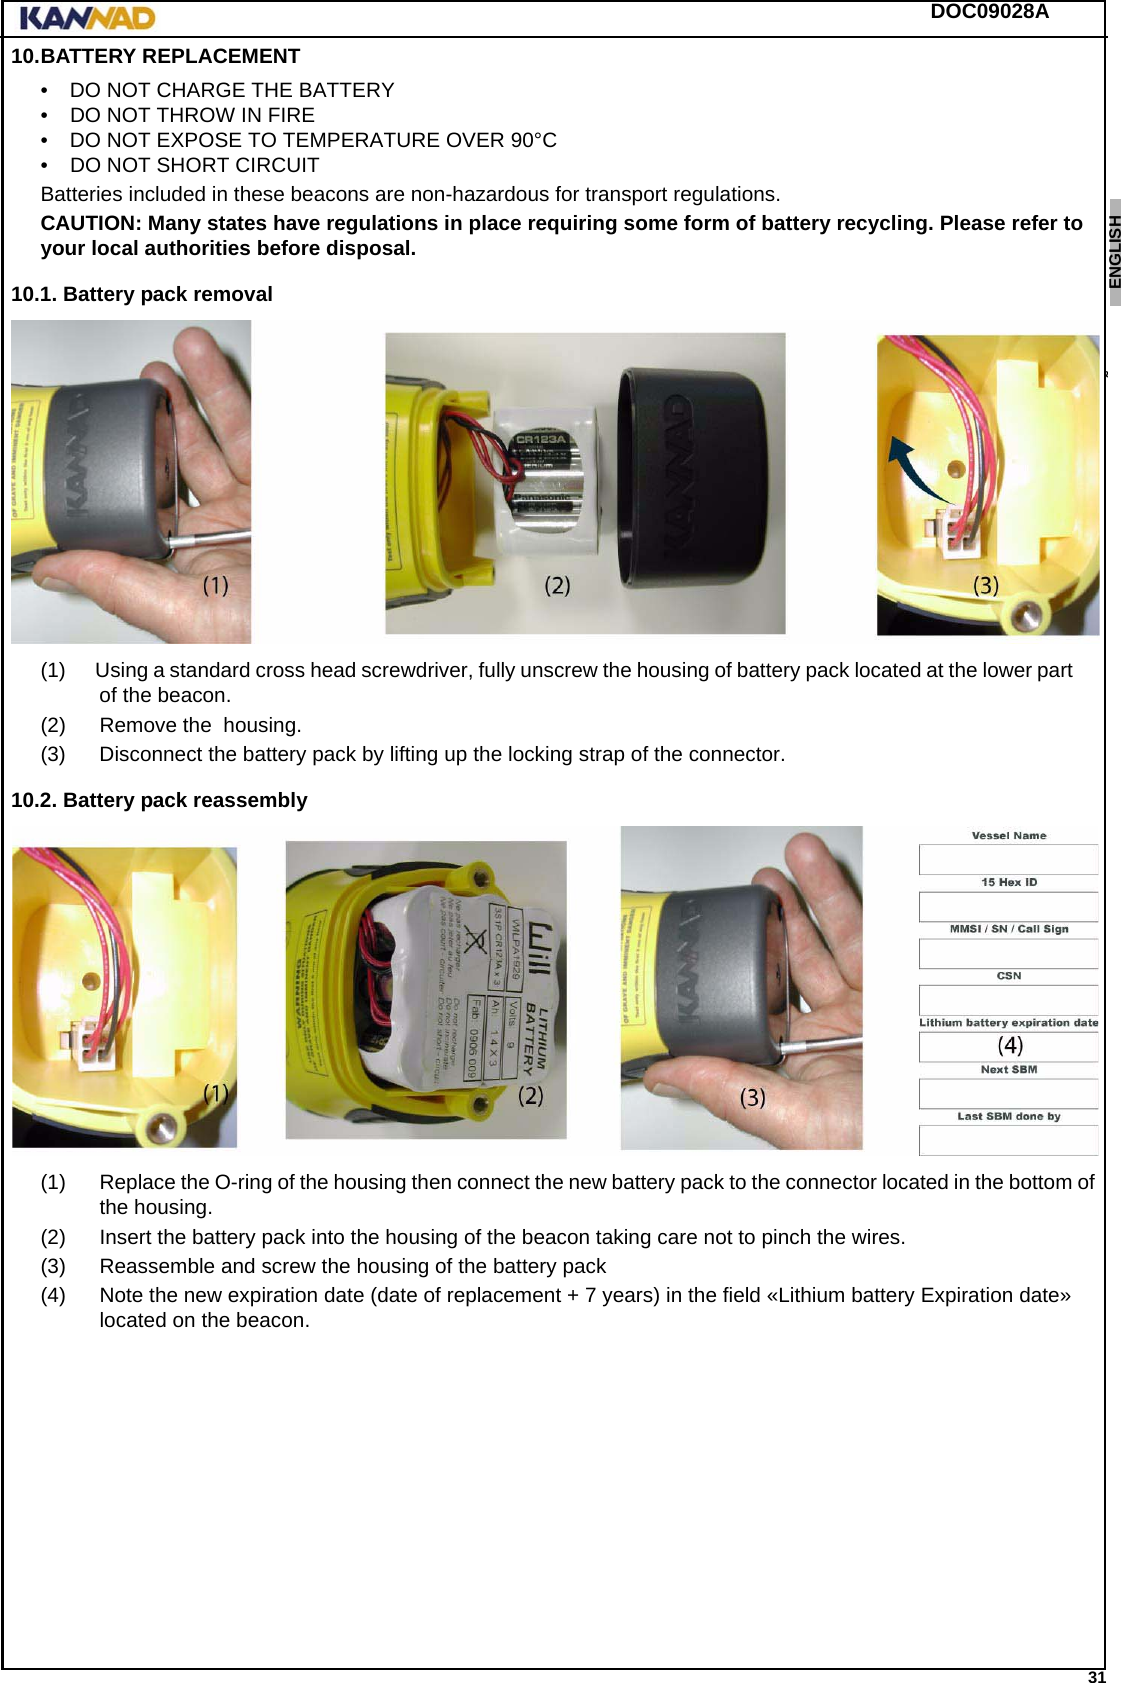 DOC09028A 31ENGLISH ESPAÑOL DEUTSCH  FRANÇAIS ITALIANO NEDERLANDS LANG7 LANG8 LANG9 LANG10 LANG11 LANG12 10.BATTERY REPLACEMENT• DO NOT CHARGE THE BATTERY• DO NOT THROW IN FIRE• DO NOT EXPOSE TO TEMPERATURE OVER 90°C• DO NOT SHORT CIRCUITBatteries included in these beacons are non-hazardous for transport regulations.CAUTION: Many states have regulations in place requiring some form of battery recycling. Please refer to your local authorities before disposal.10.1. Battery pack removal(1)      Using a standard cross head screwdriver, fully unscrew the housing of battery pack located at the lower part of the beacon.(2) Remove the  housing.(3) Disconnect the battery pack by lifting up the locking strap of the connector.10.2. Battery pack reassembly(1) Replace the O-ring of the housing then connect the new battery pack to the connector located in the bottom of the housing.(2) Insert the battery pack into the housing of the beacon taking care not to pinch the wires.(3) Reassemble and screw the housing of the battery pack(4) Note the new expiration date (date of replacement + 7 years) in the field «Lithium battery Expiration date» located on the beacon.